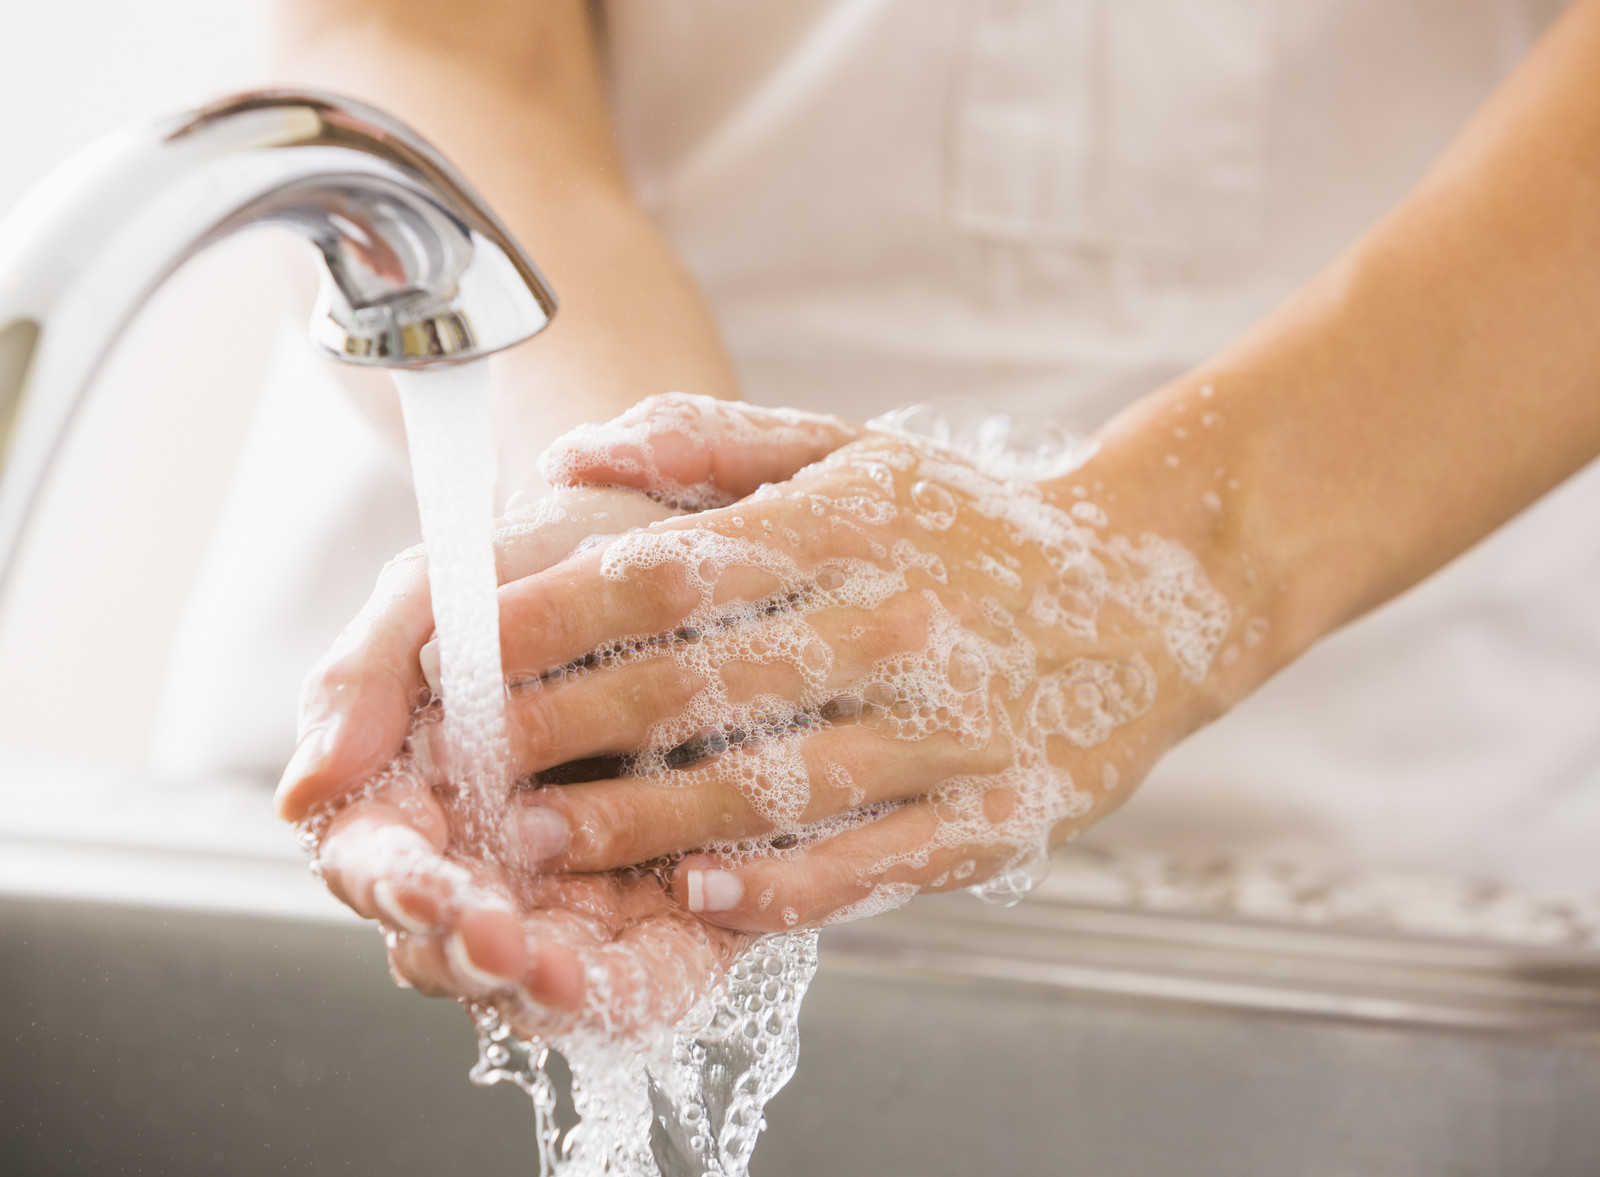 Handwashing Tips for People with Eczema and Other Skin Conditions